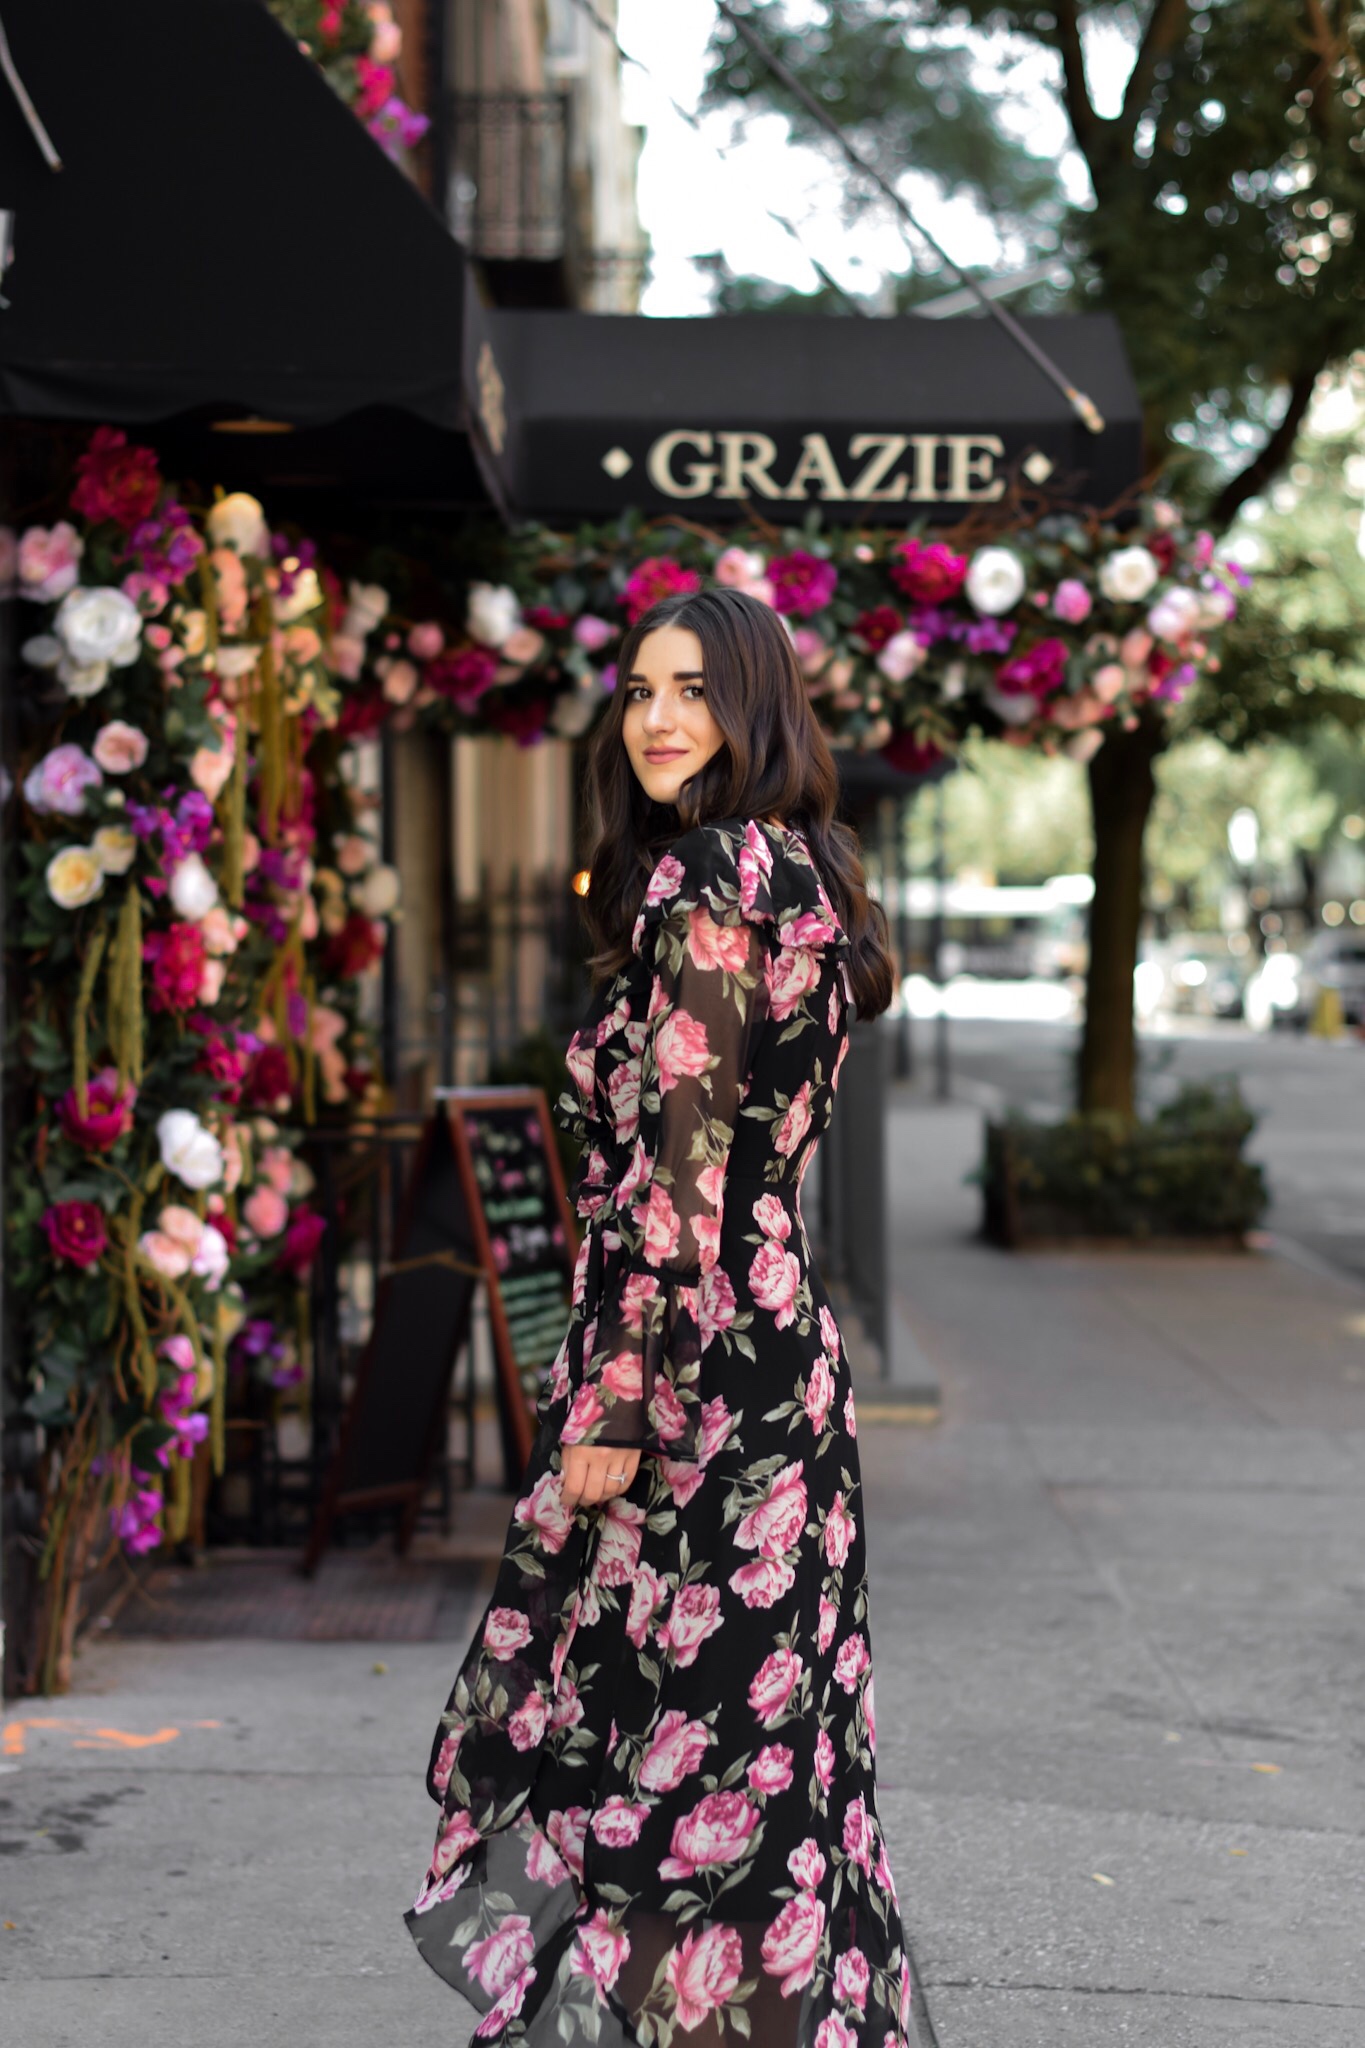 Why I'll Be Sitting Out My 11th Season Of NYFW Floral Maxi Wrap Dress Esther Santer Fashion Blog NYC Street Style Blogger Outfit OOTD Trendy ASOS Vince Camuto Black Braided Sandals Summer Look Floral Backdrop New York  City Upper East Side Photoshoot.jpg